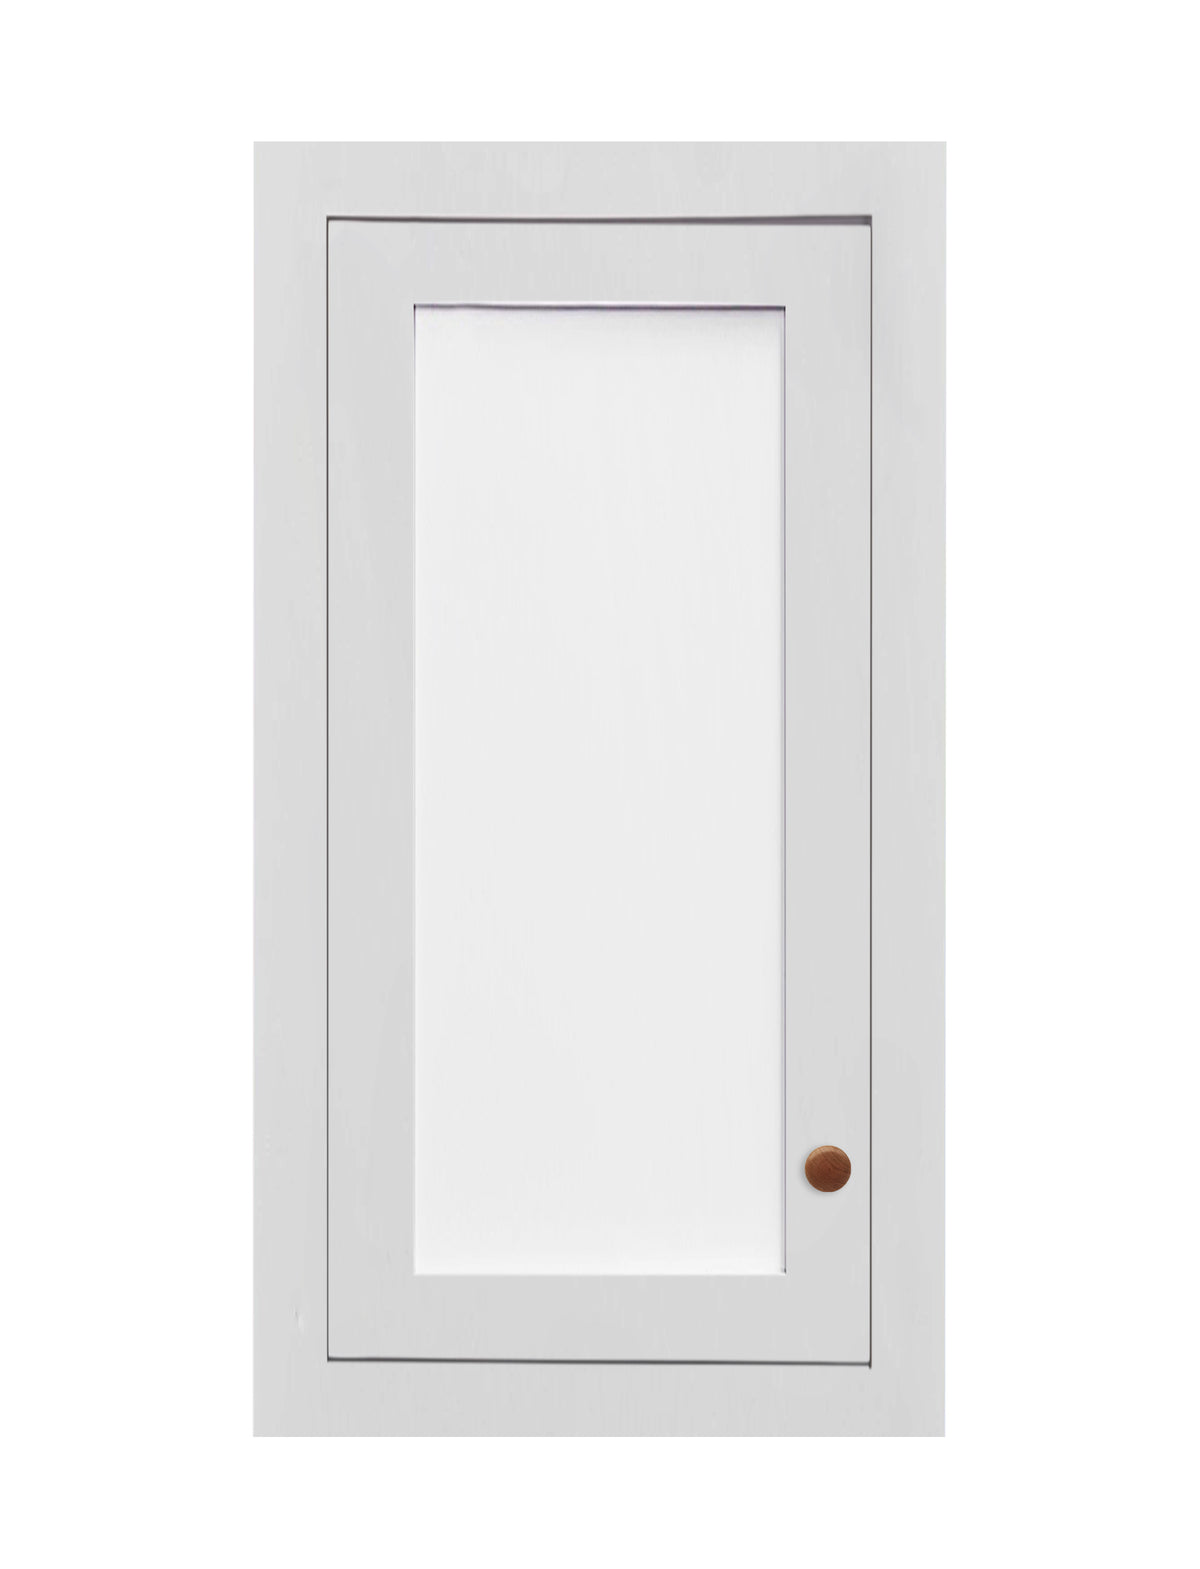 15" Wide Custom Glass Ready Snow White Inset Shaker Wall Cabinet - Single Door 9", 12", 15", 18", 21", 24" & 27" Tall